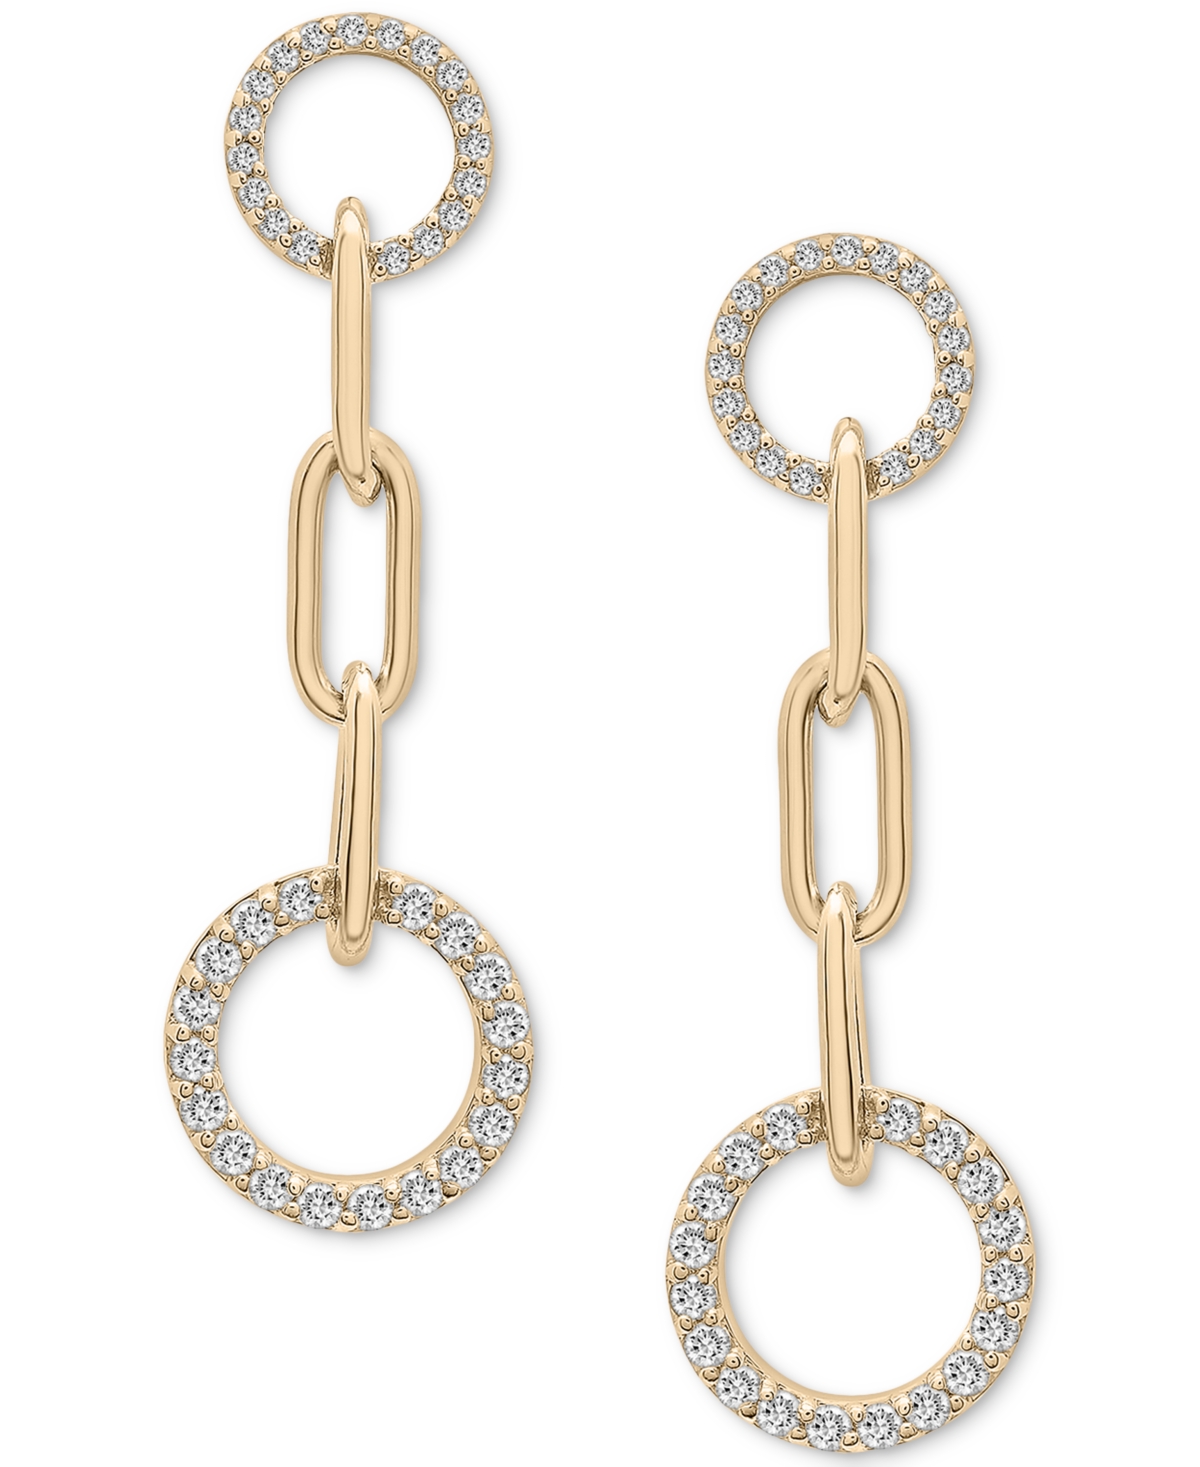 Diamond Circle Link Drop Earrings (1/2 ct. t.w.) in 14k Gold, Created for Macy's - Yellow Gold